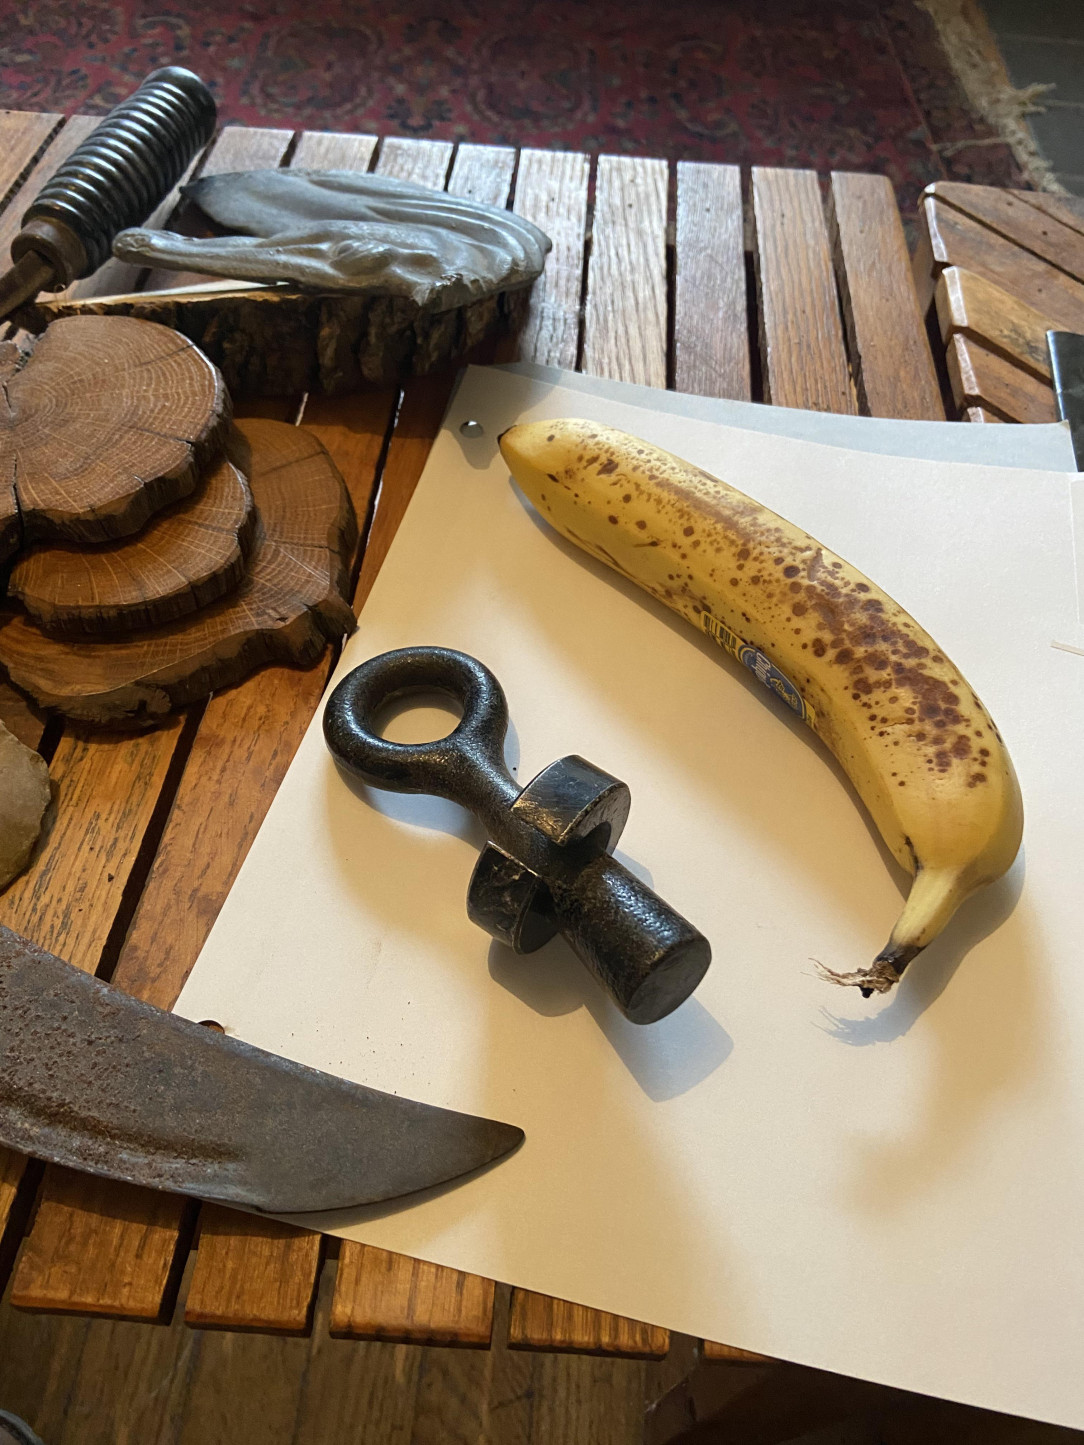 Barbed wire puller (banana for scale)